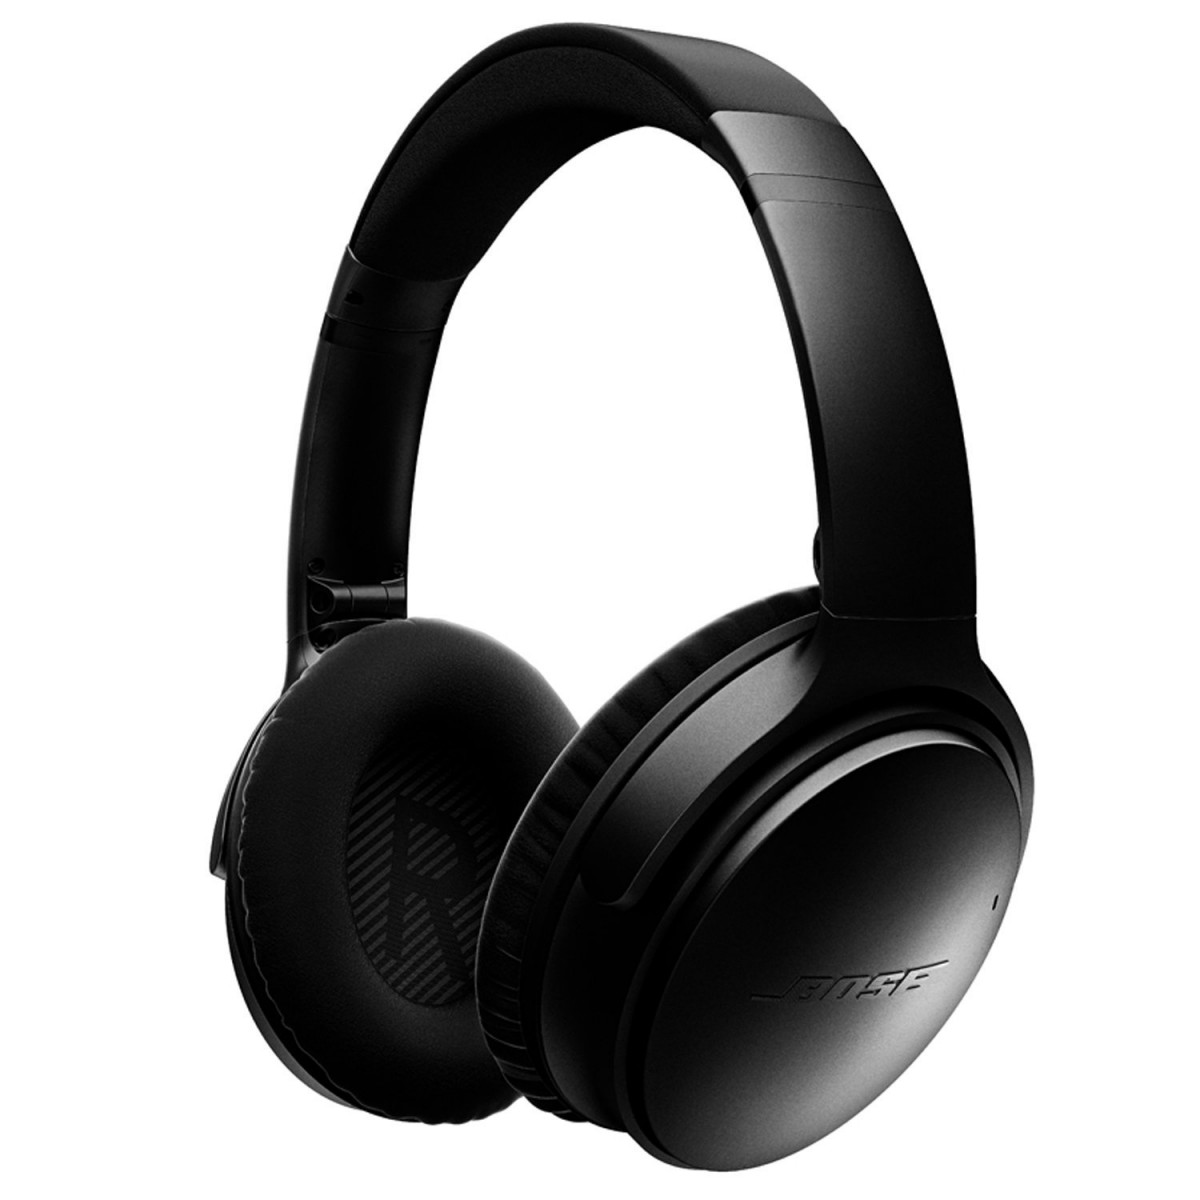 Is the Bose QuietComfort 35 II gaming headset any good? – Consumer